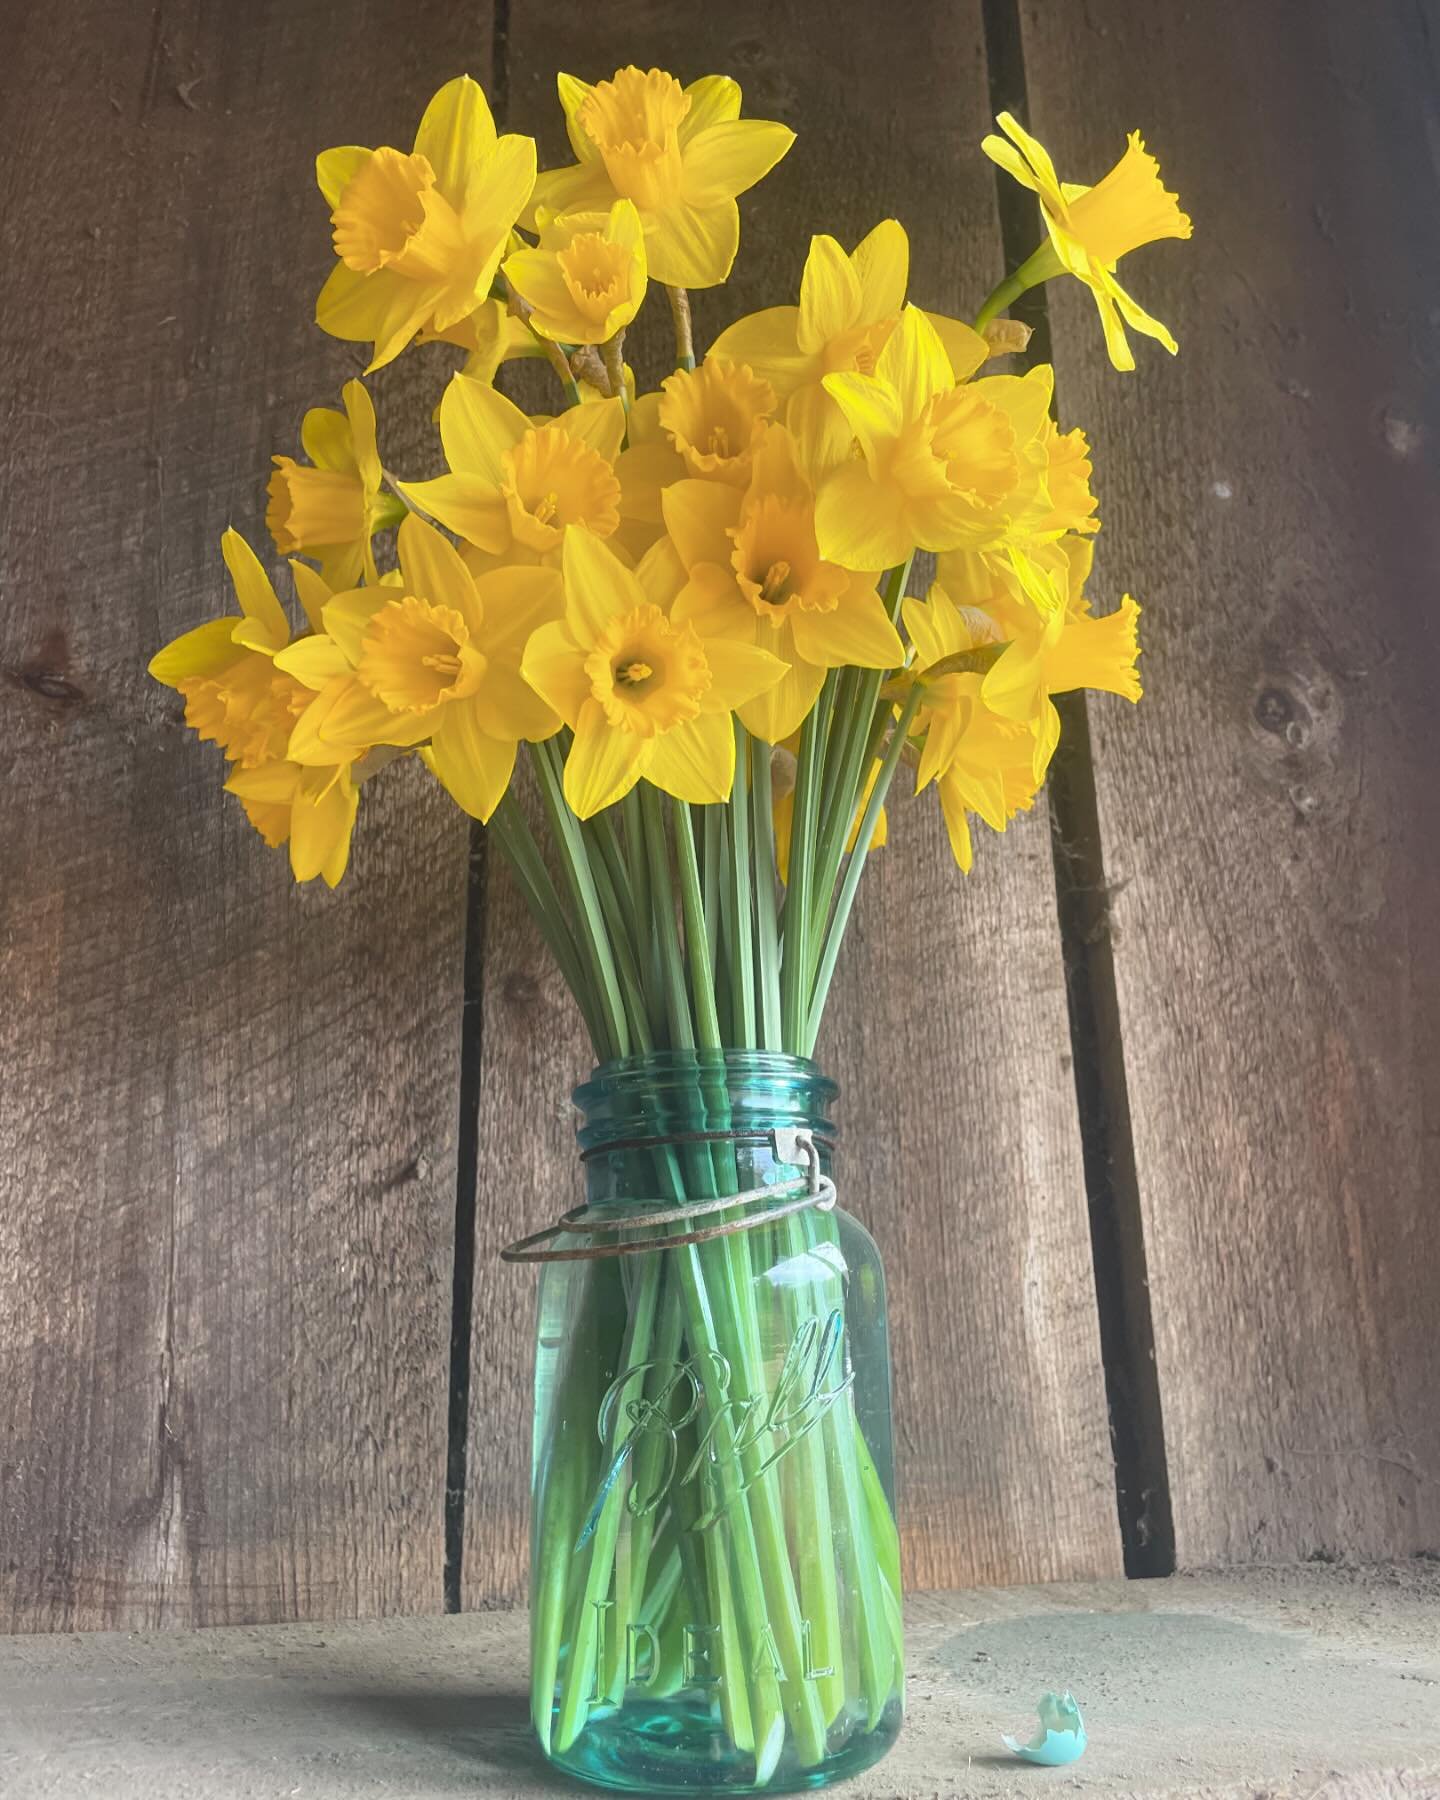 It&rsquo;s the last day to sign up for our Spring Flowers and Season Pass CSA! Visit gladfarmvt.com to purchase. Pick up starts on Friday. The stand will be open this Friday, Saturday &amp; Sunday 🪺